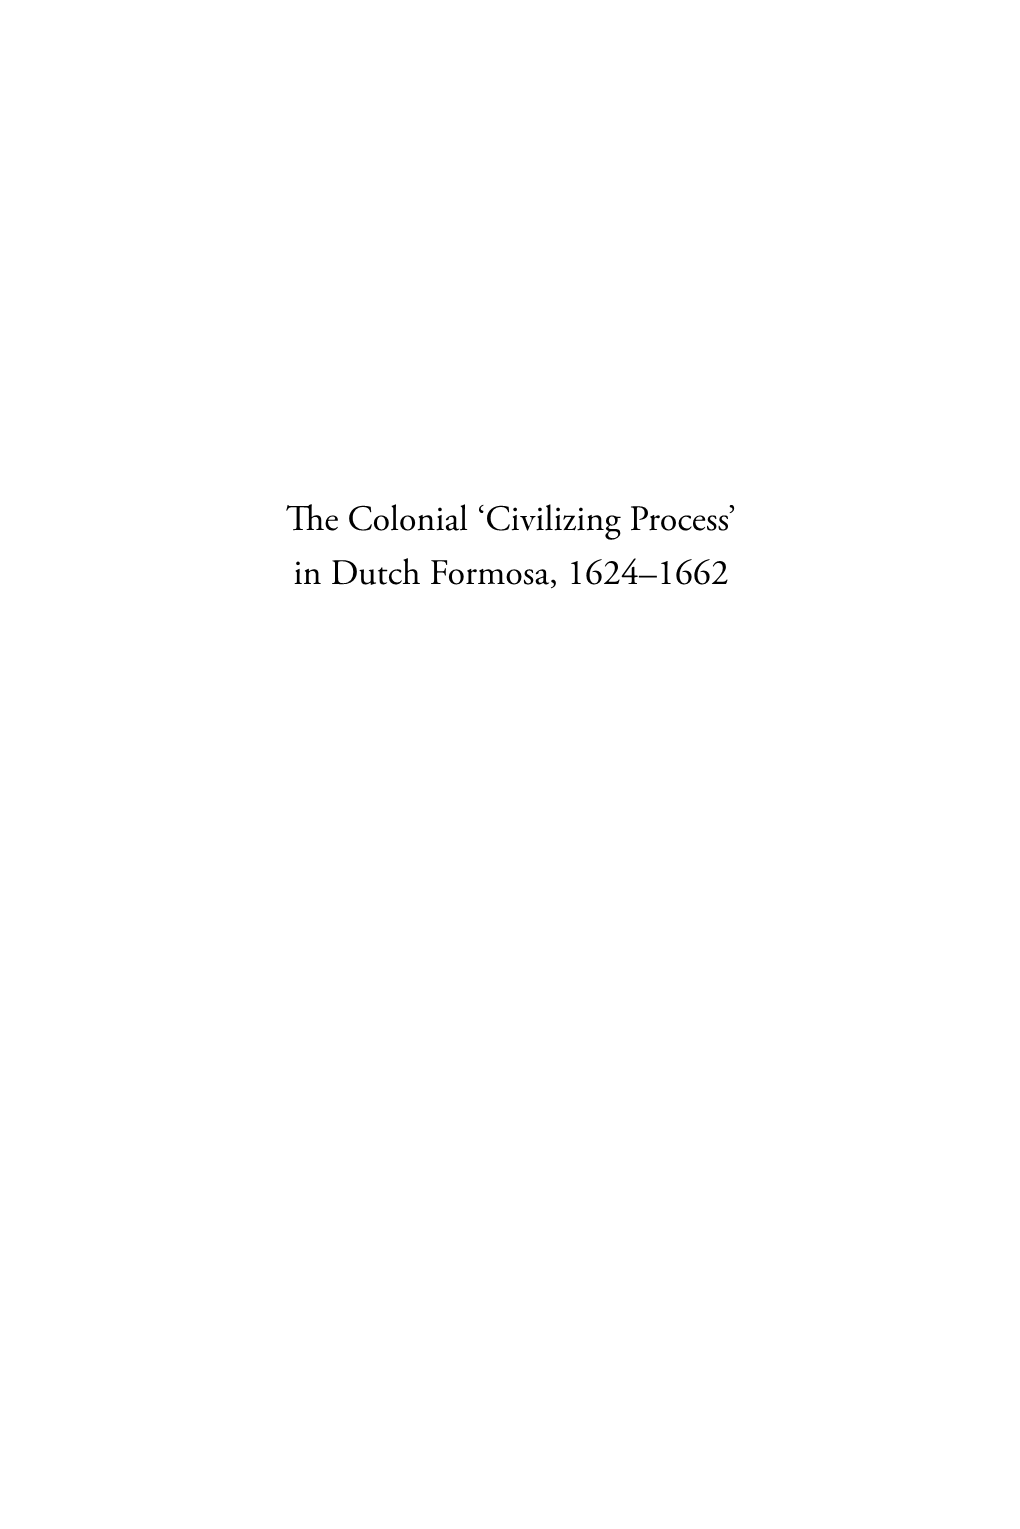 The Colonial 'Civilizing Process' in Dutch Formosa, 1624–1662